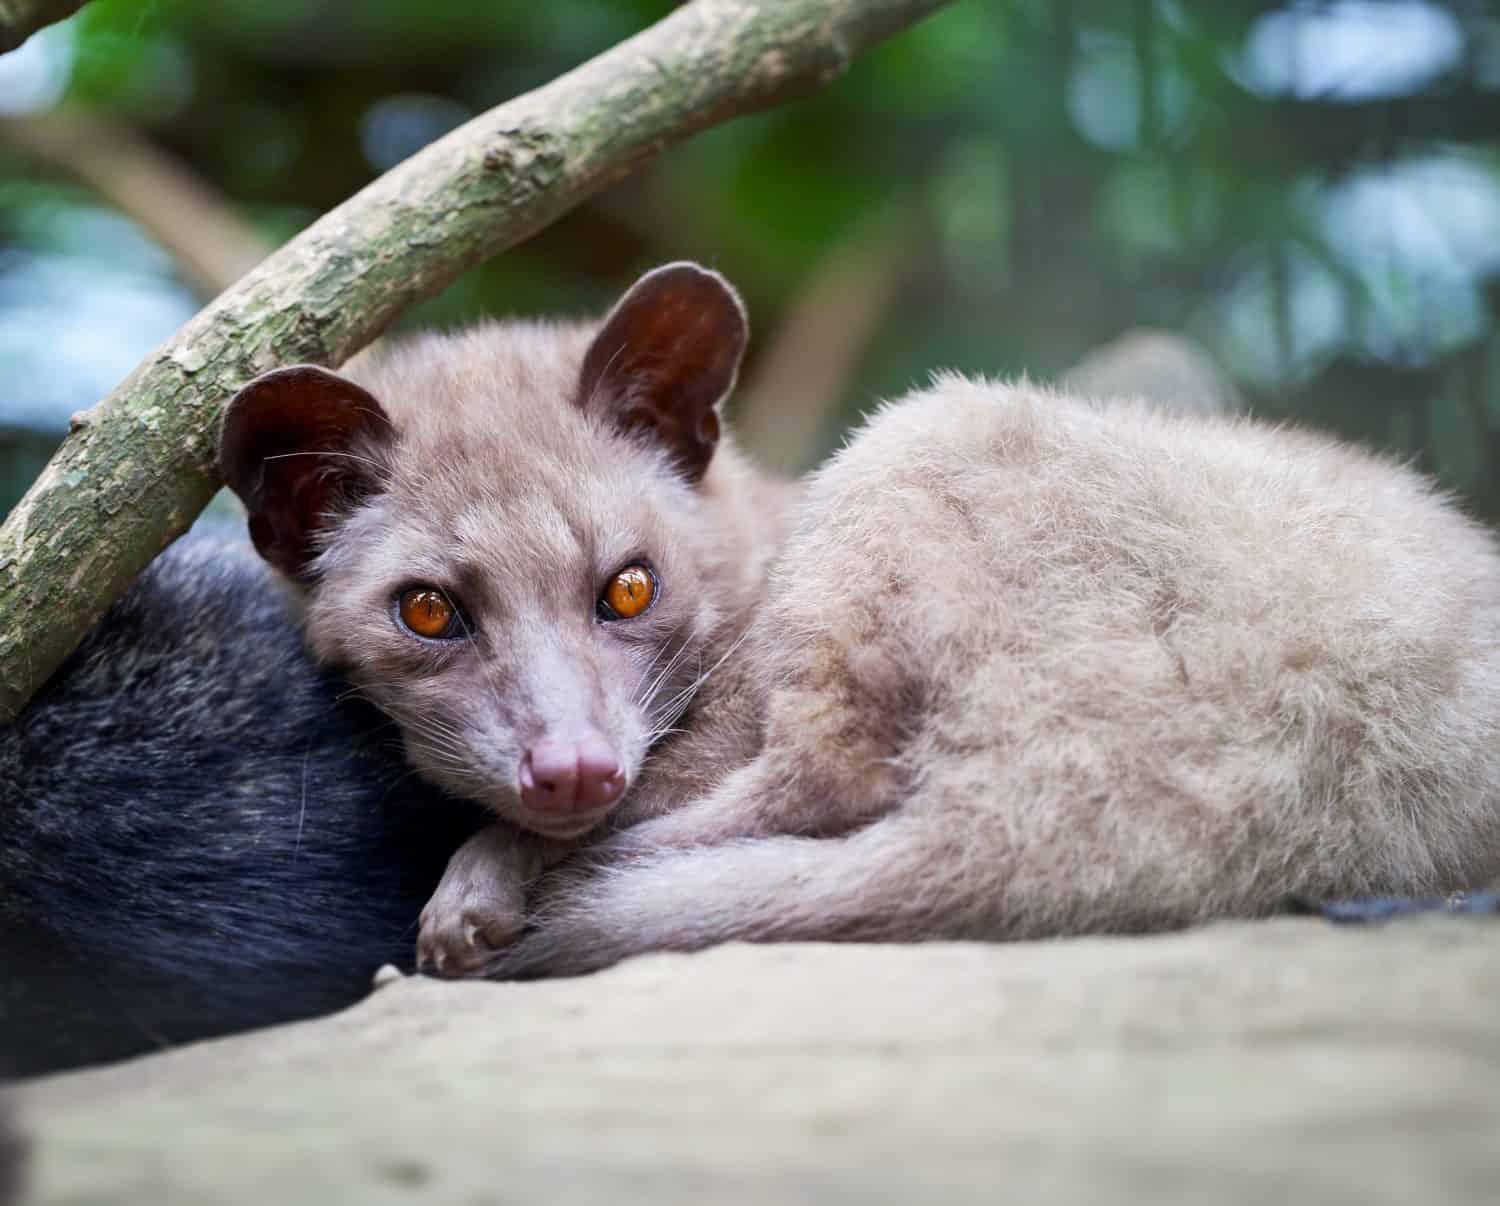 Asian Palm Civet - The animal used for the production of expensive coffee Kopi Luwak